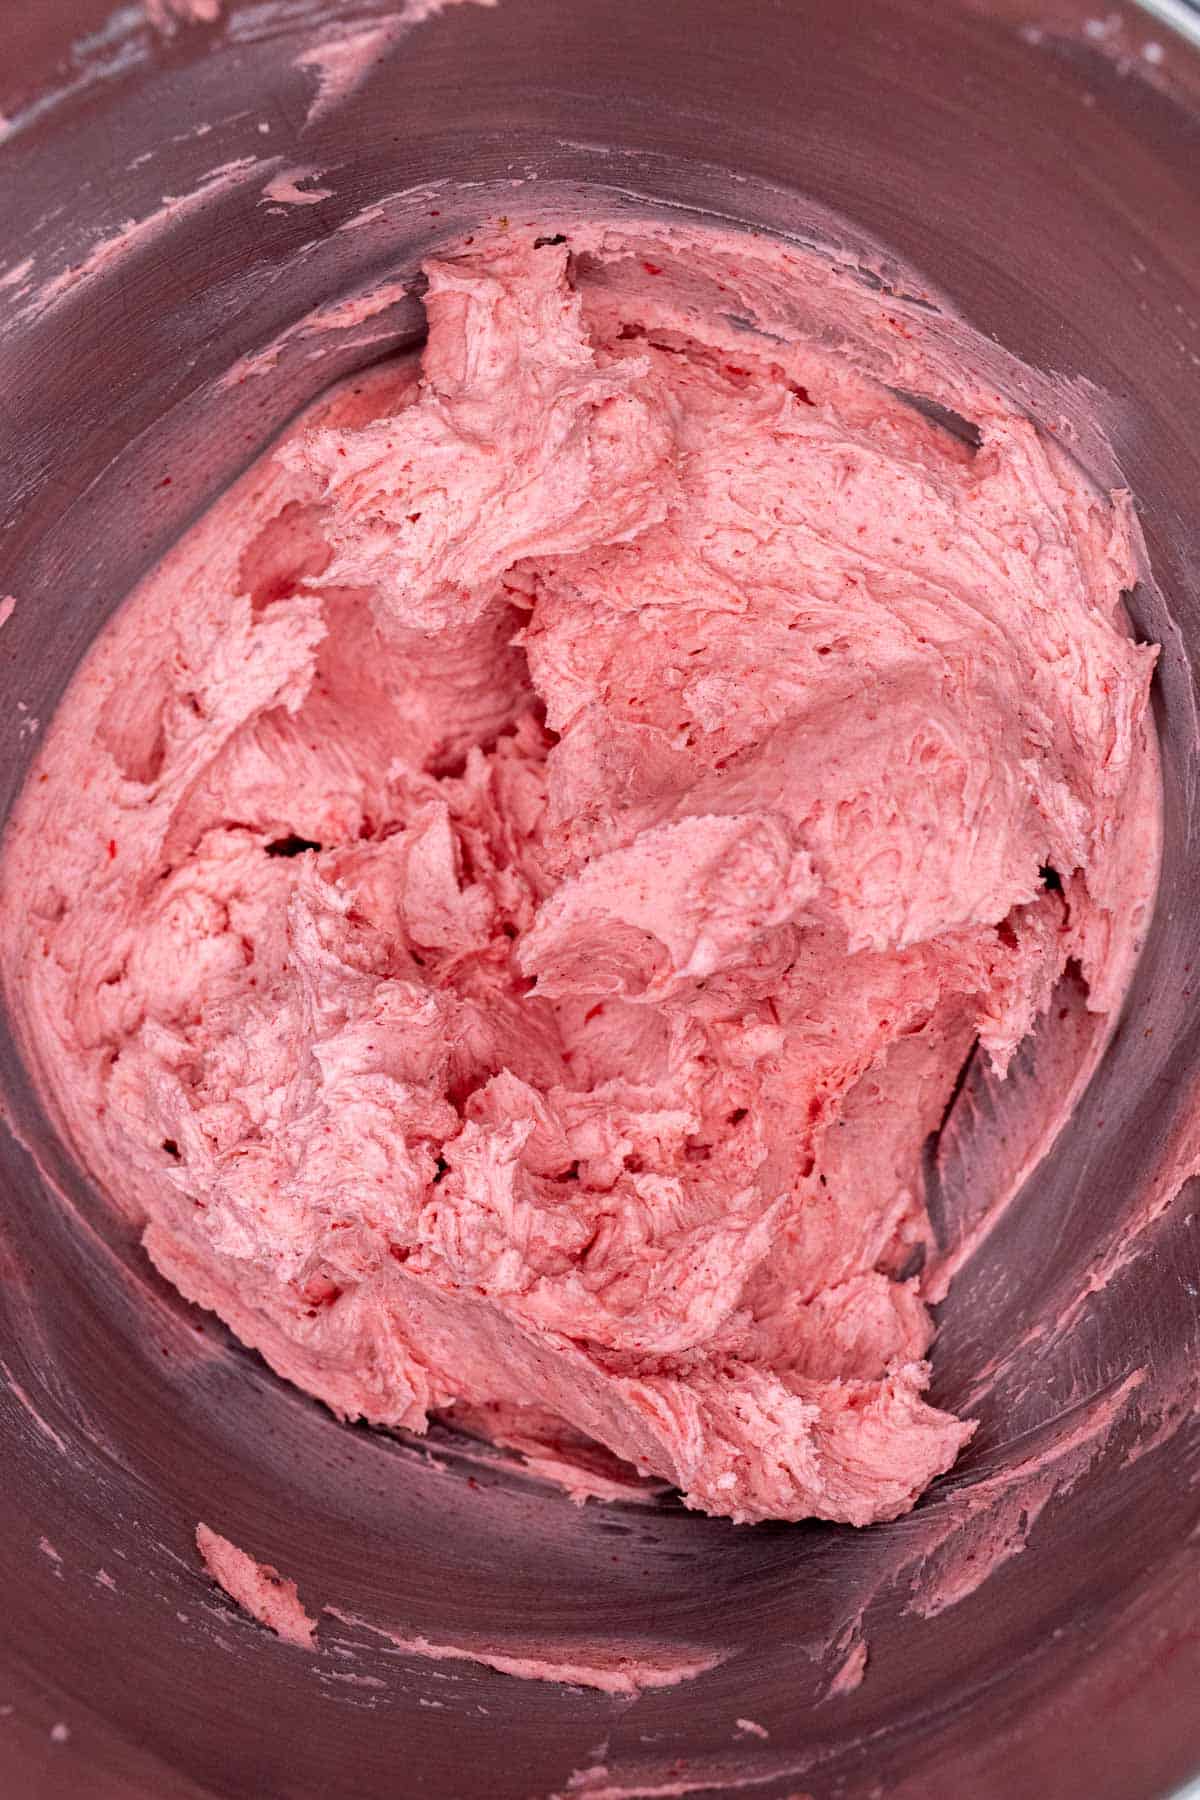 Strawberry buttercream in bowl of stand mixer after heavy cream was added and beaten until fluffy.